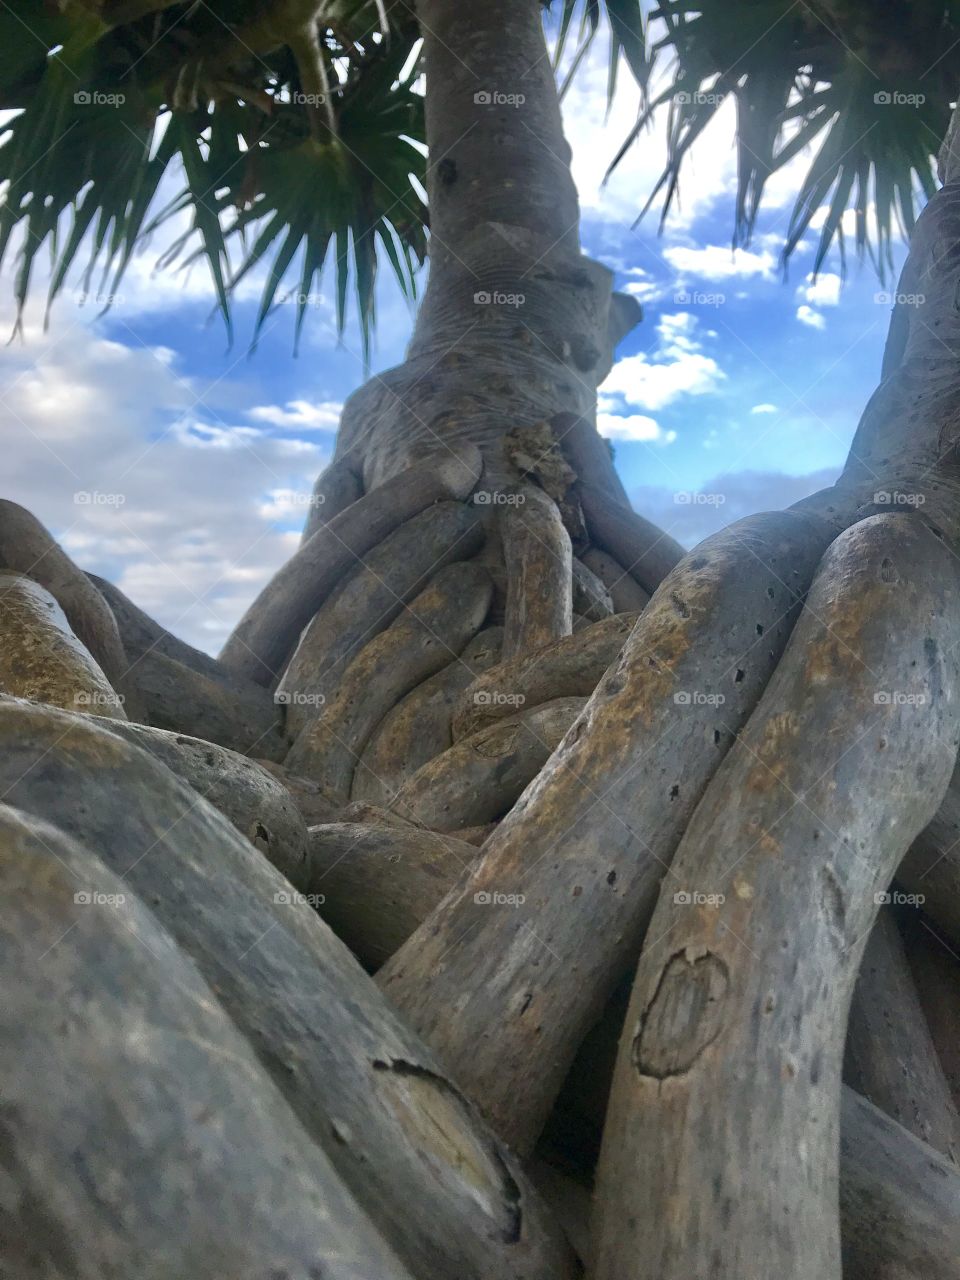 These roots are worthy of a photo. 